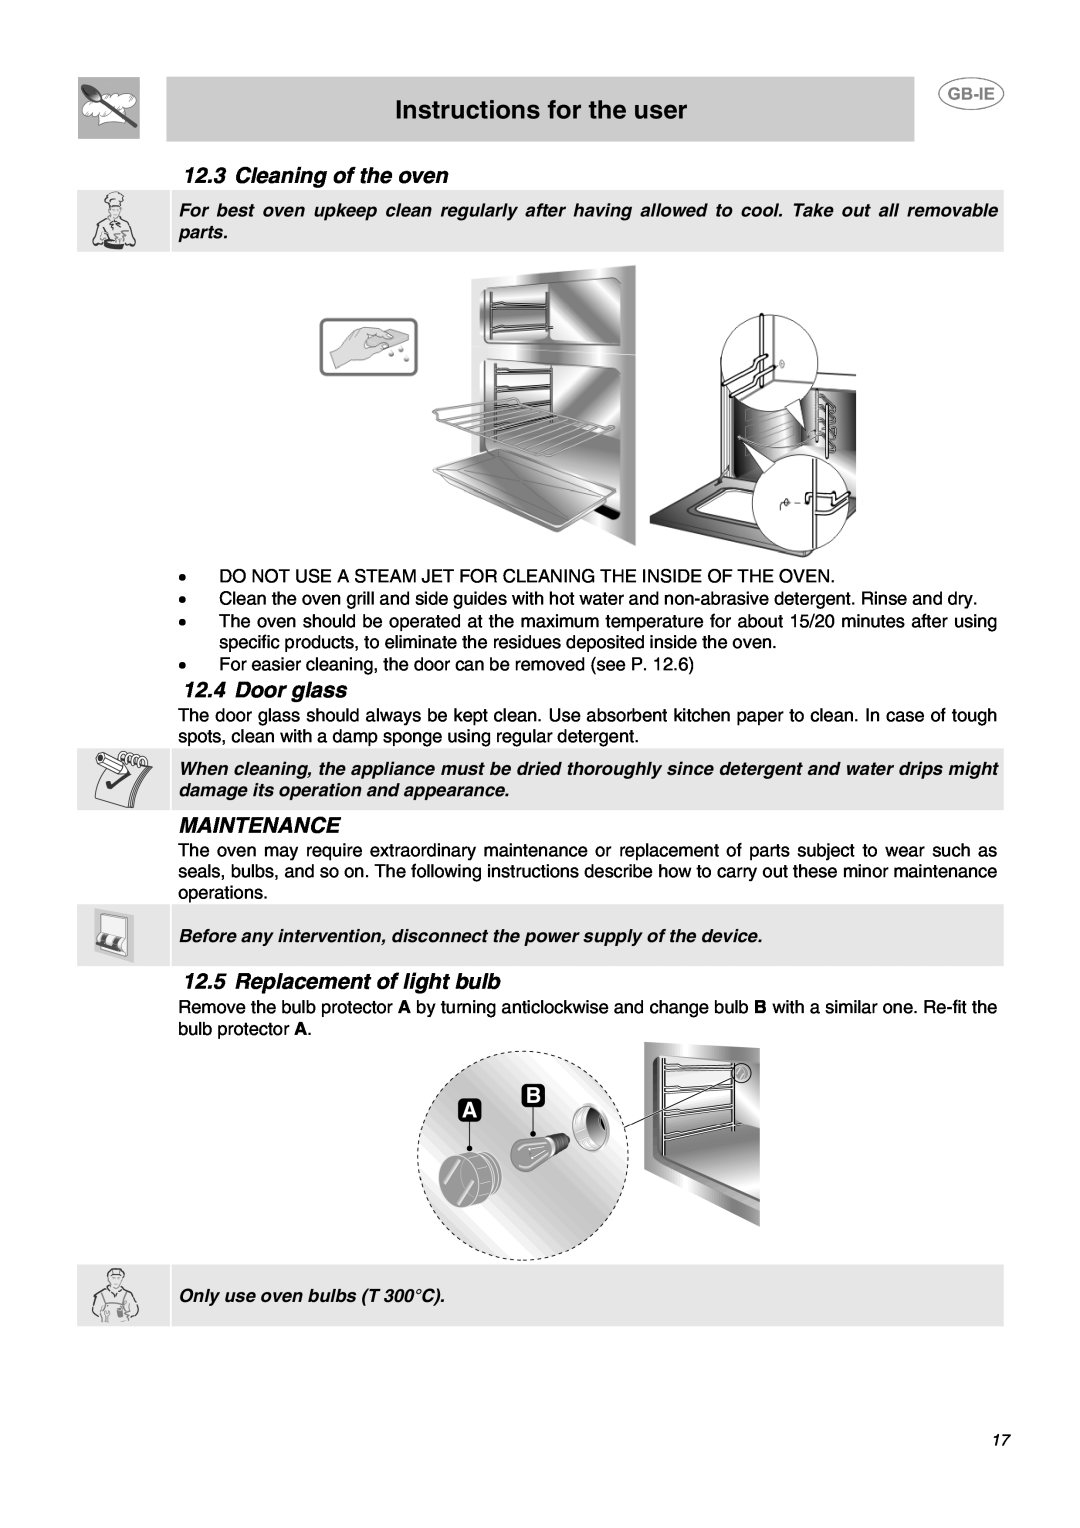 Smeg CC62MFX5 Cleaning of the oven, 12.4Door glass, Maintenance, Replacement of light bulb, Instructions for the user 